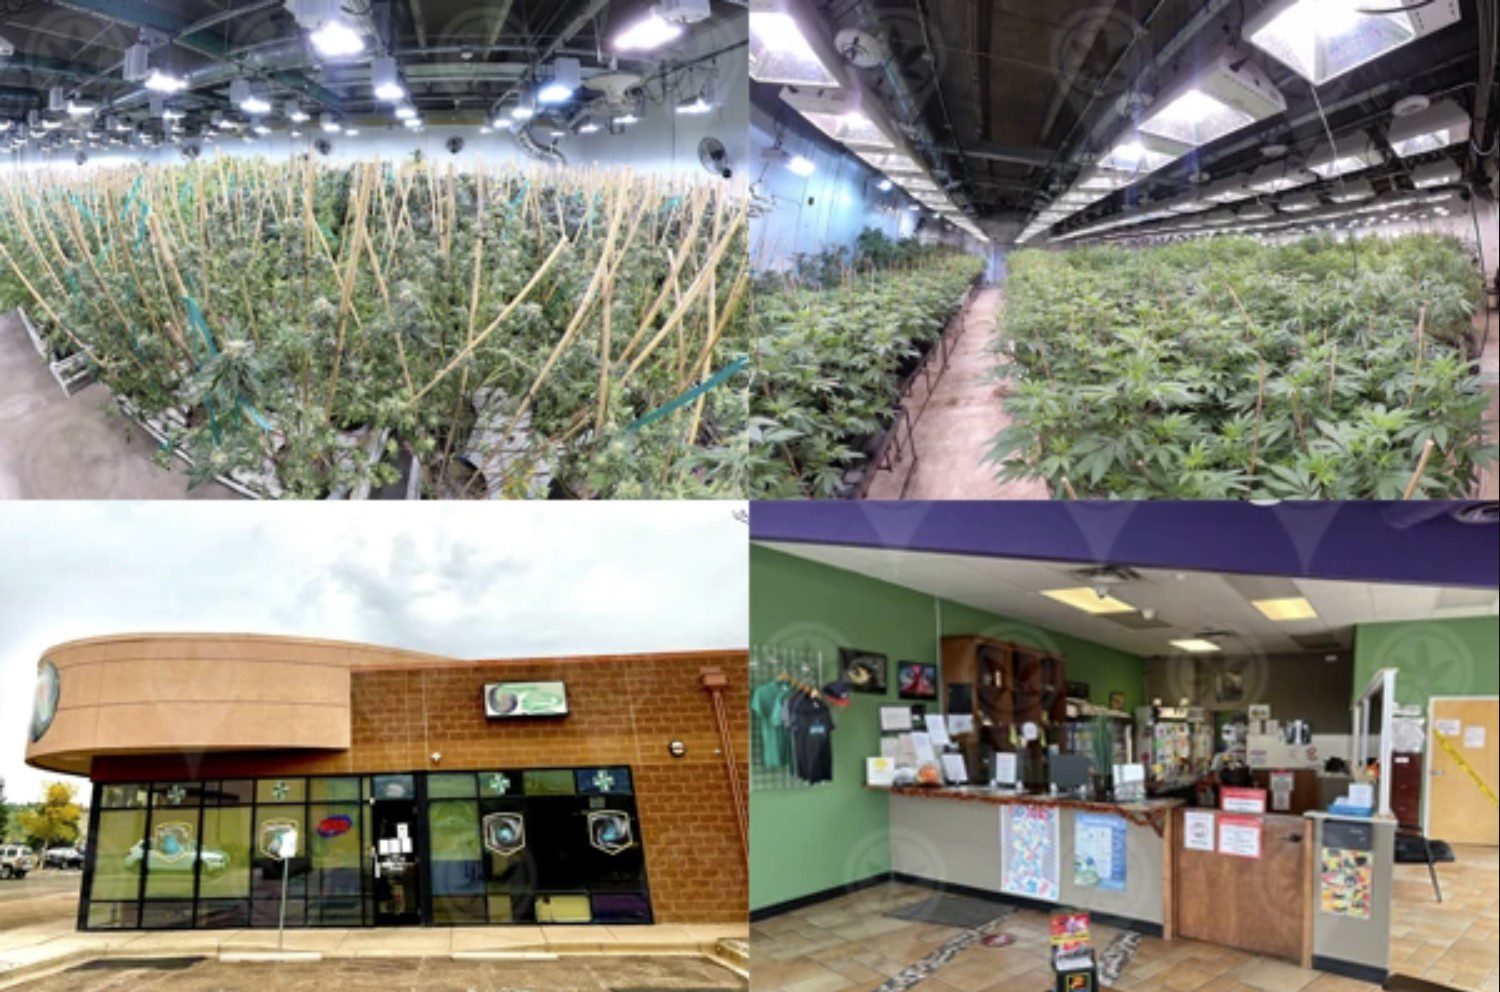 Off Market – Fully Turnkey Cultivation and Retail Business with over $2.1M Revenue